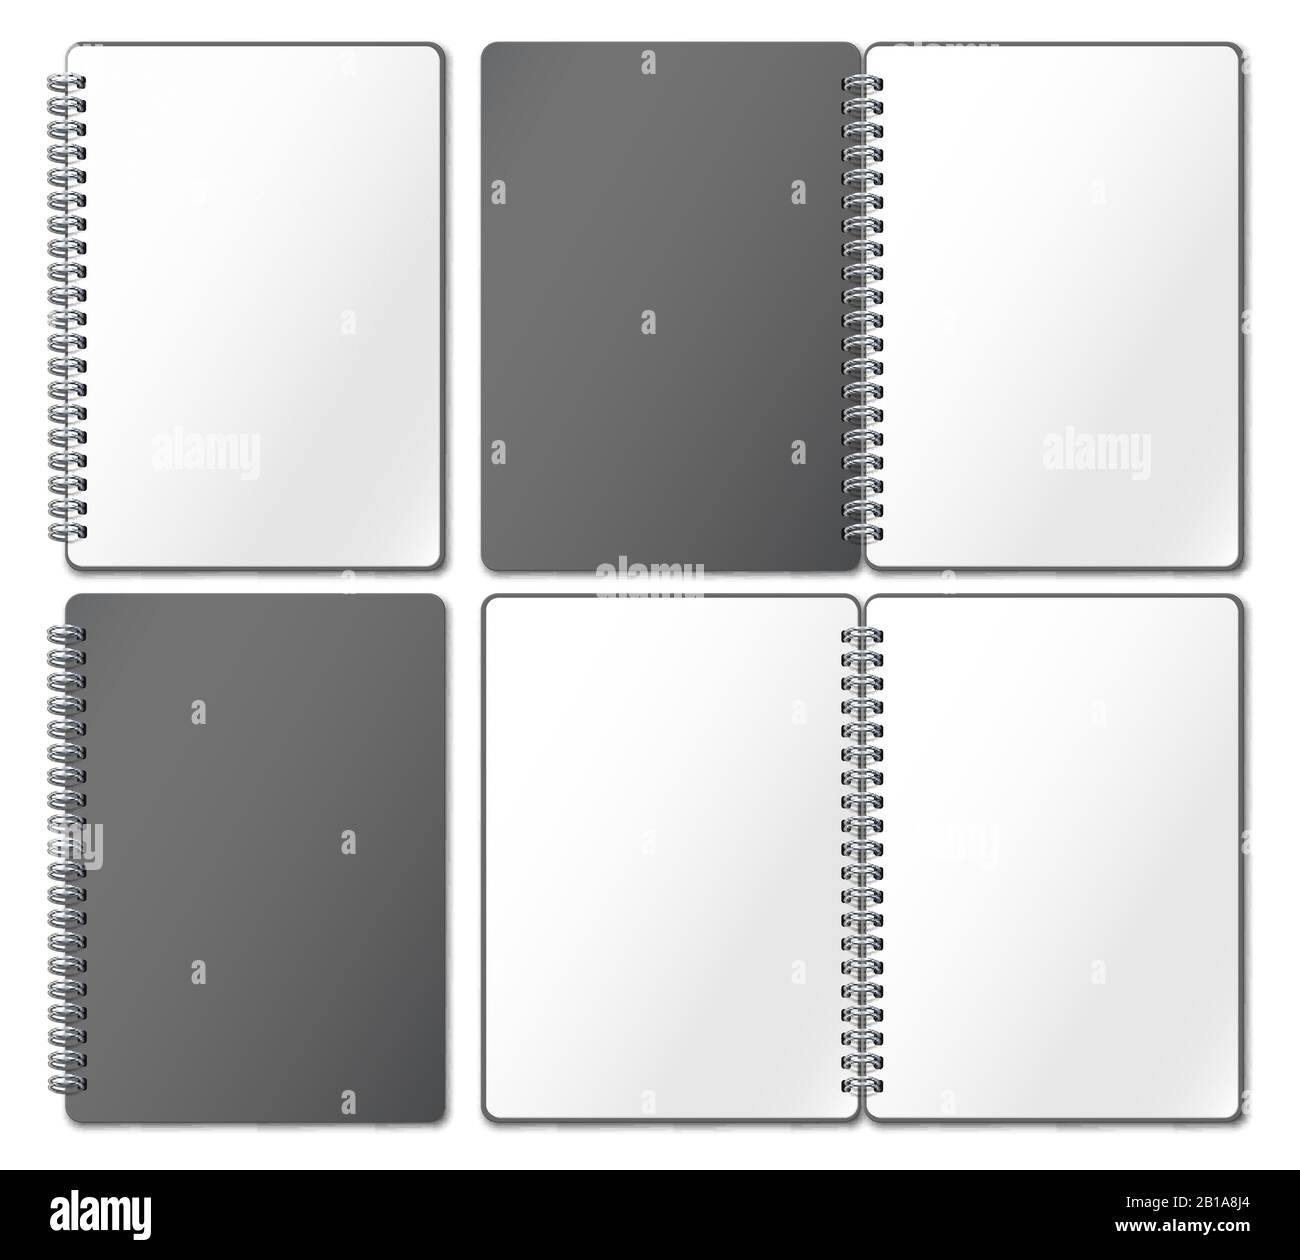 Notebook mockup. Empty copybook, notebooks pages binded on metal spiral and open bound sketchbook realistic 3d vector illustration Stock Vector